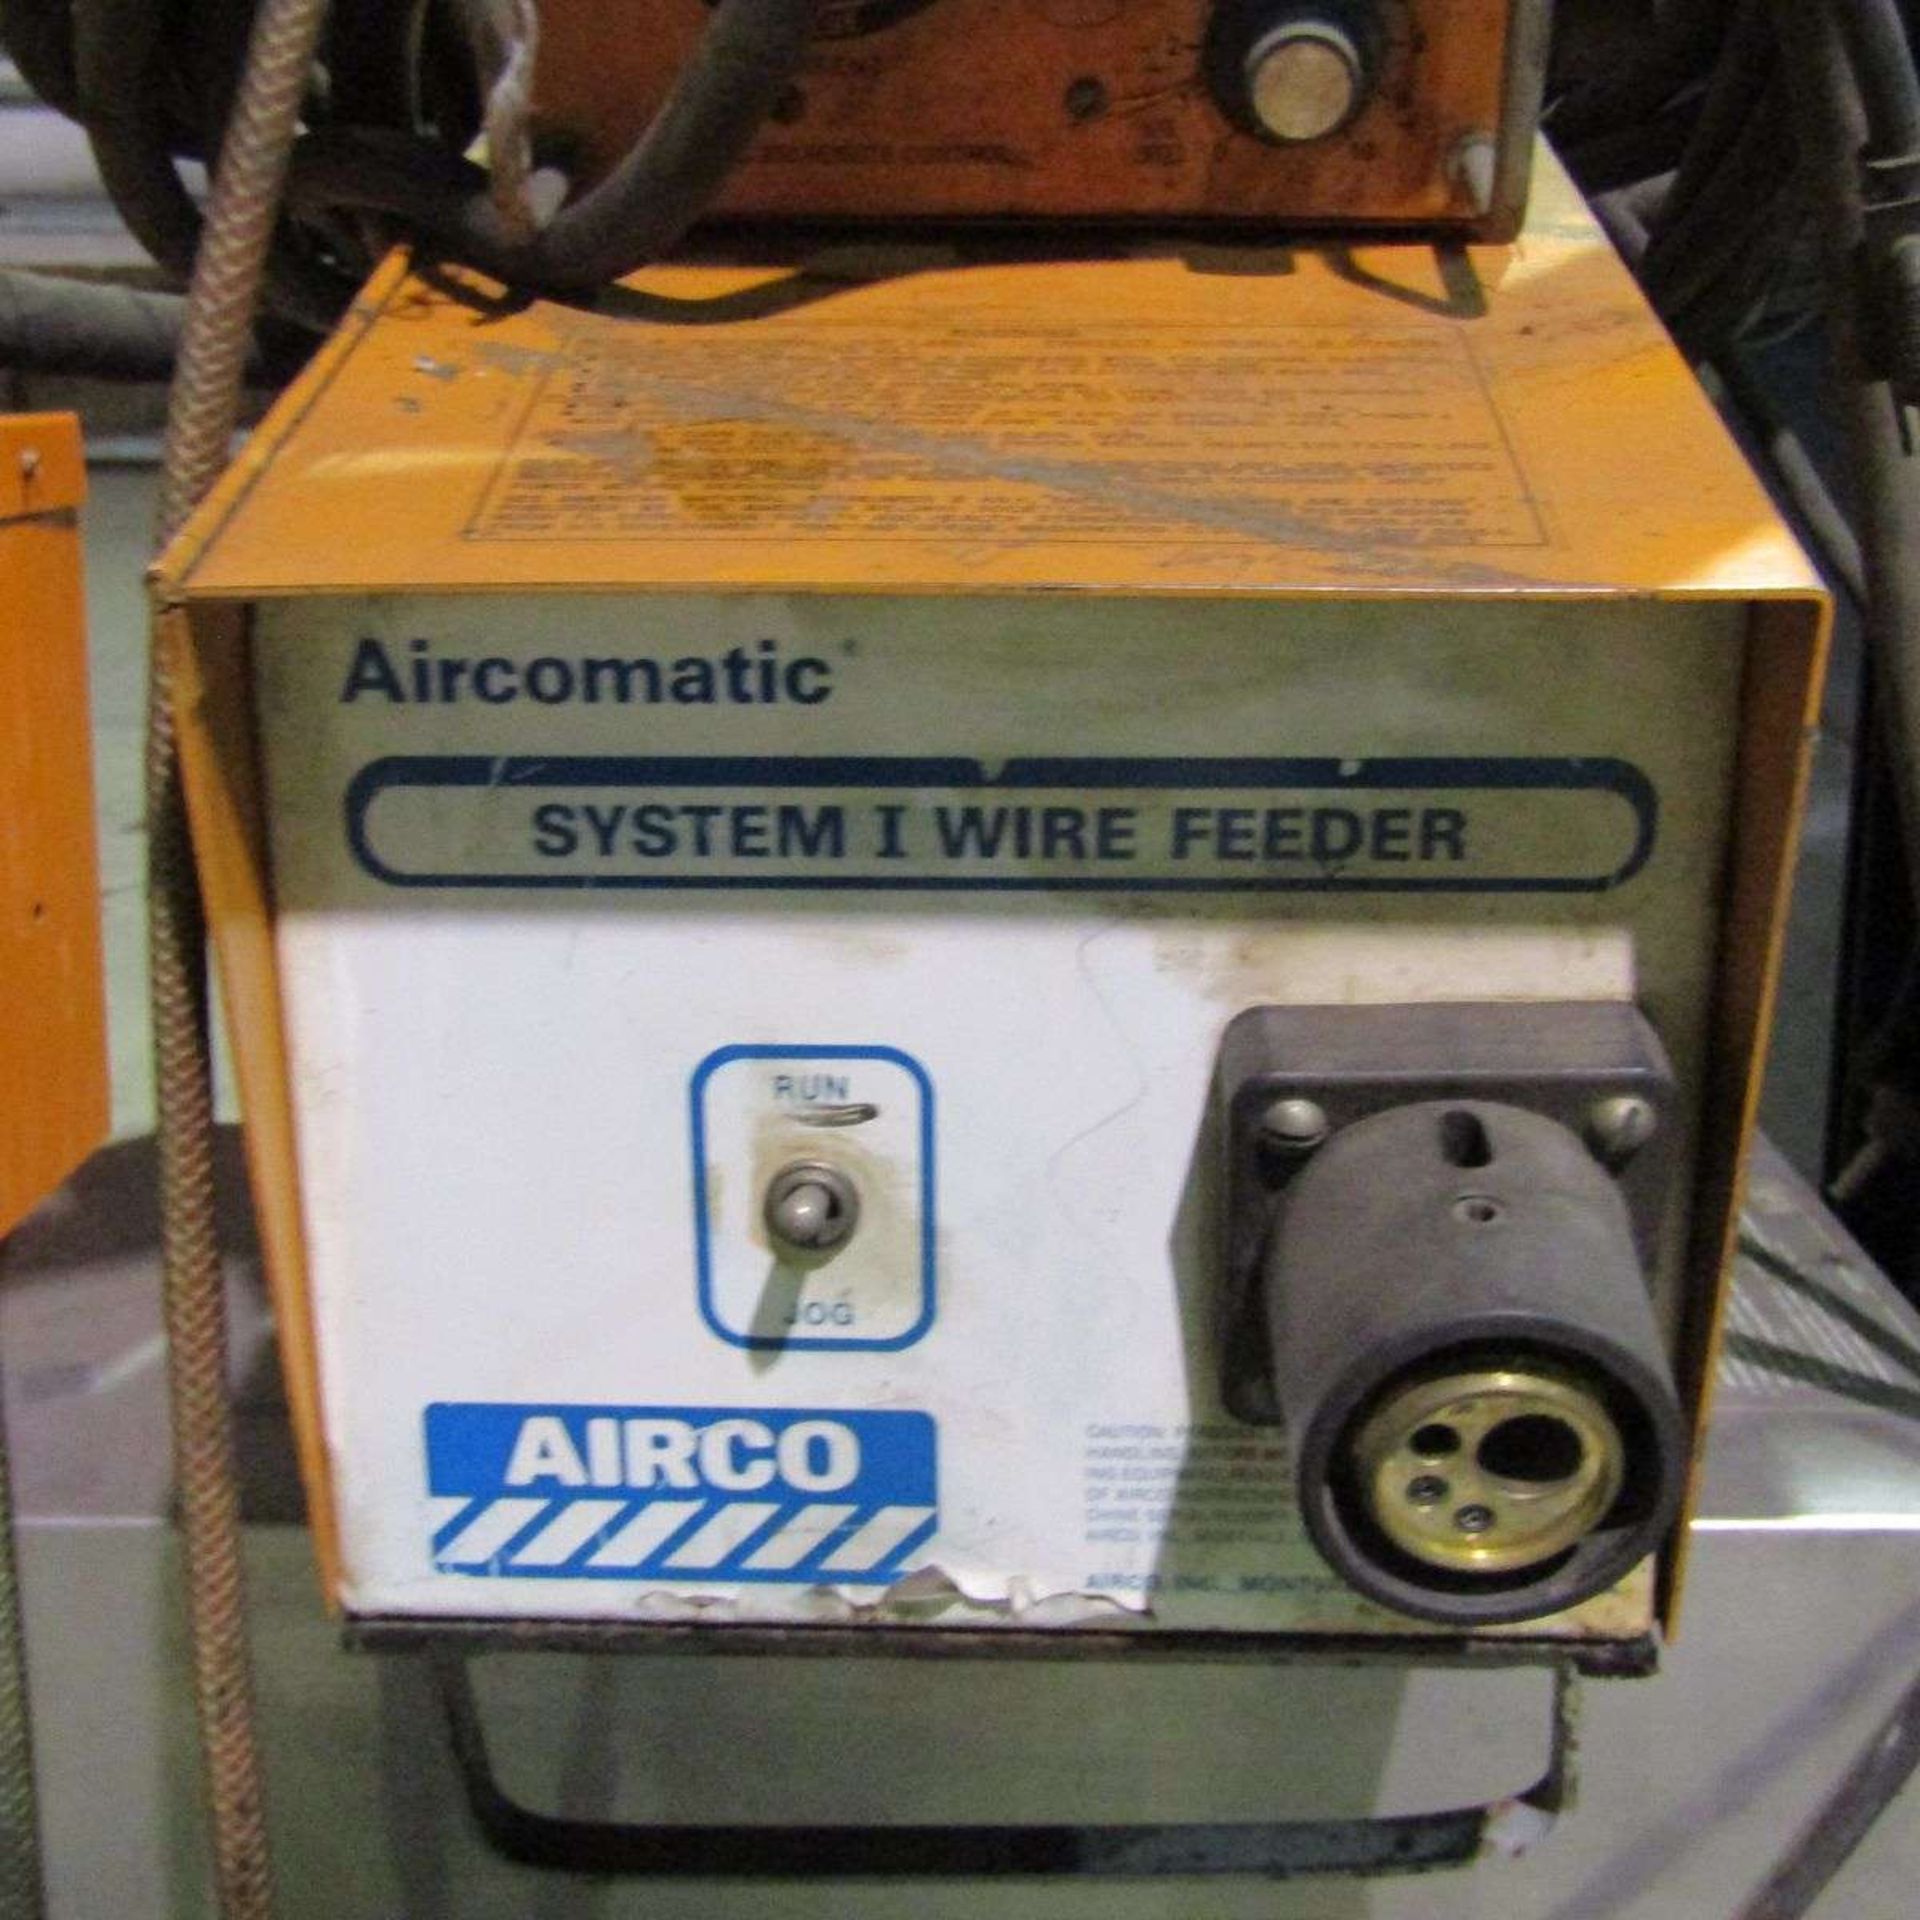 Aircomatic System I Wire Feeder - Image 4 of 6